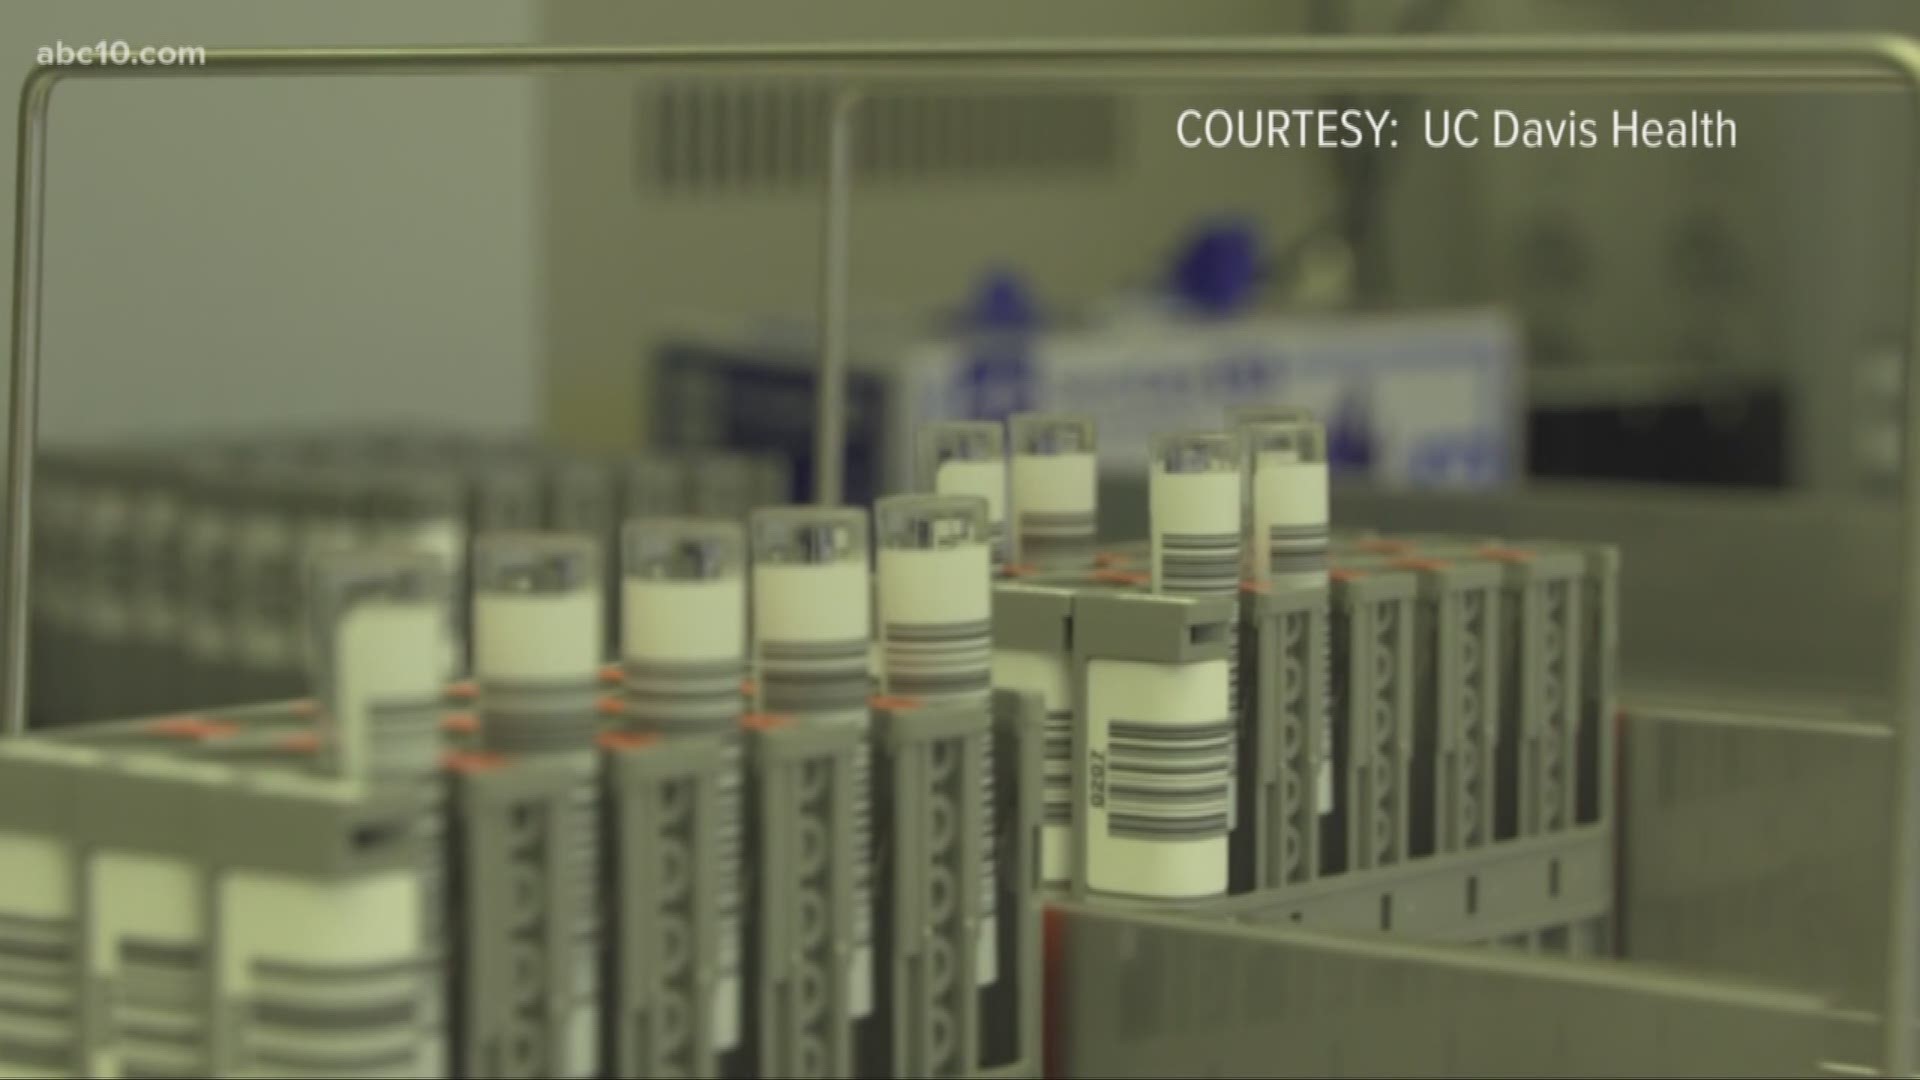 Some of the things UC Davis is working on are prevention, treatment, and rapid testing.